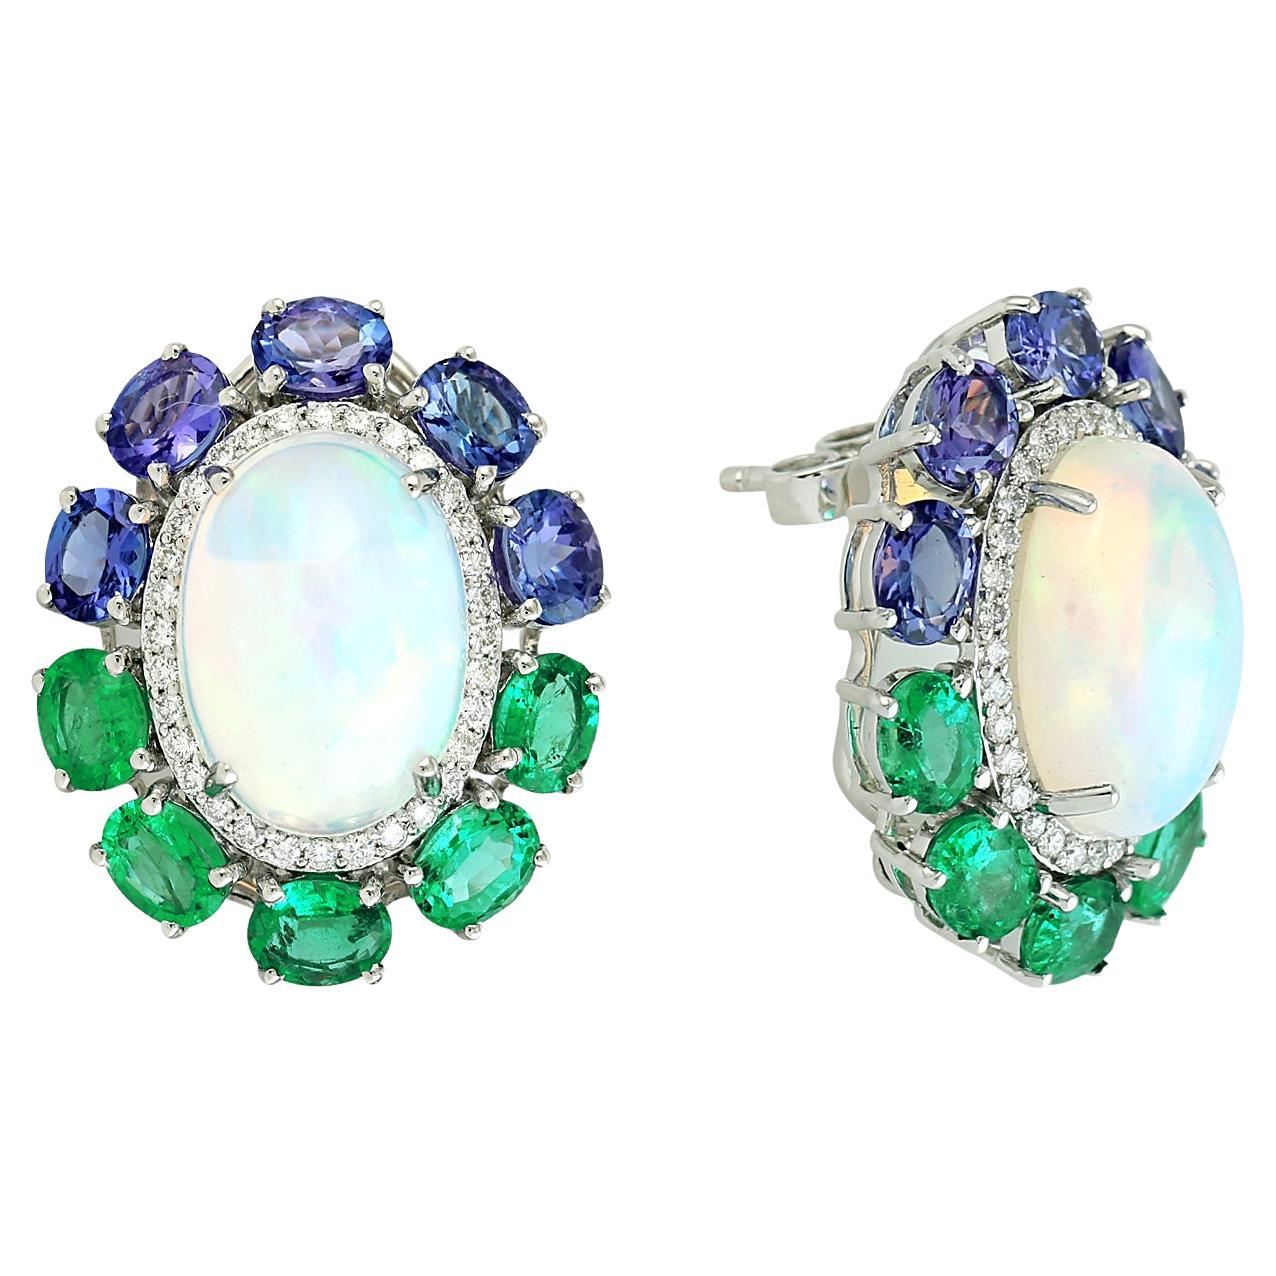 Multi Gemstone Earrings With Opal & Diamonds Made In 18k Gold For Sale